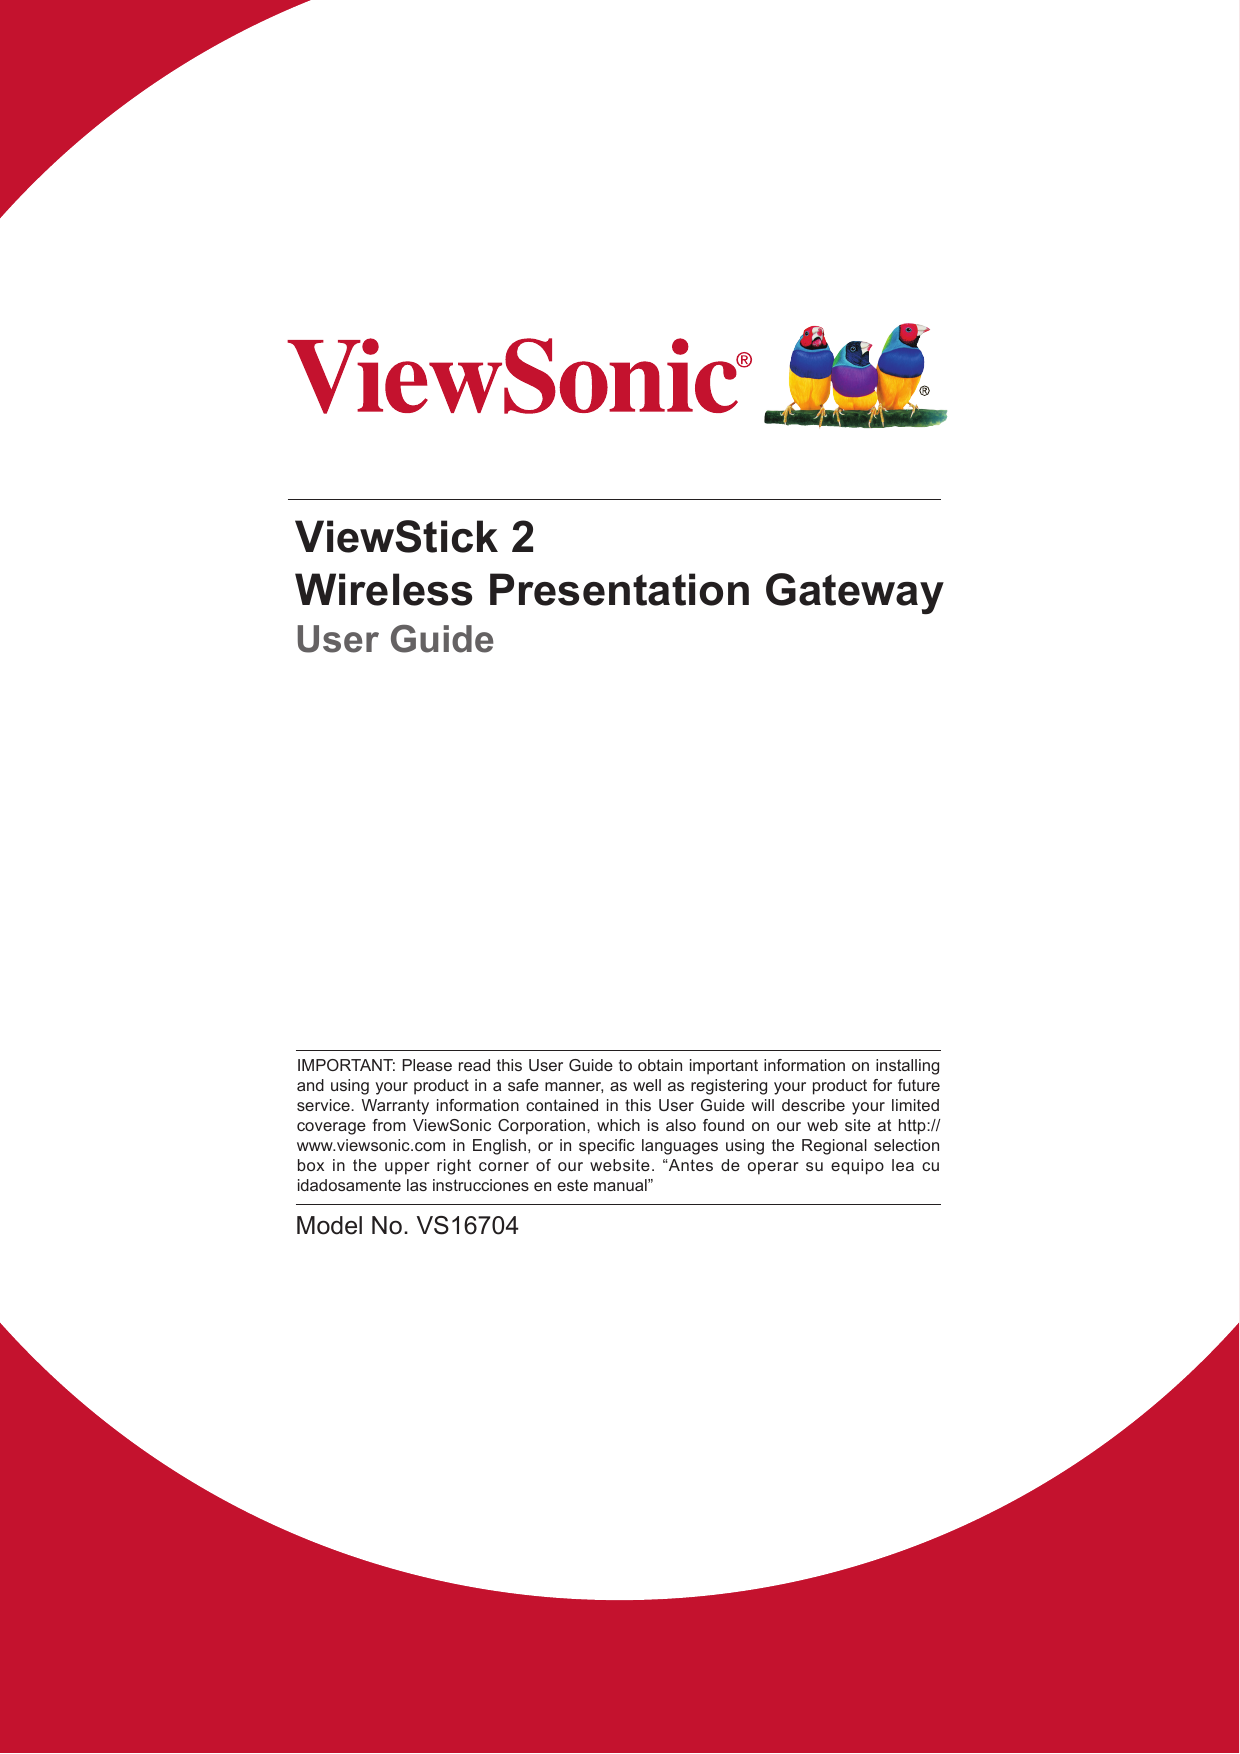 ViewStick 2Wireless Presentation GatewayUser GuideModel No. VS16704IMPORTANT: Please read this User Guide to obtain important information on installing and using your product in a safe manner, as well as registering your product for future service. Warranty information contained in this User Guide will describe your limited coverage from ViewSonic Corporation, which is also found on our web site at http://www.viewsonic.com in English, or in  specic  languages using the Regional  selection box in the upper right corner of our website. “Antes de operar su equipo lea cu idadosamente las instrucciones en este manual”